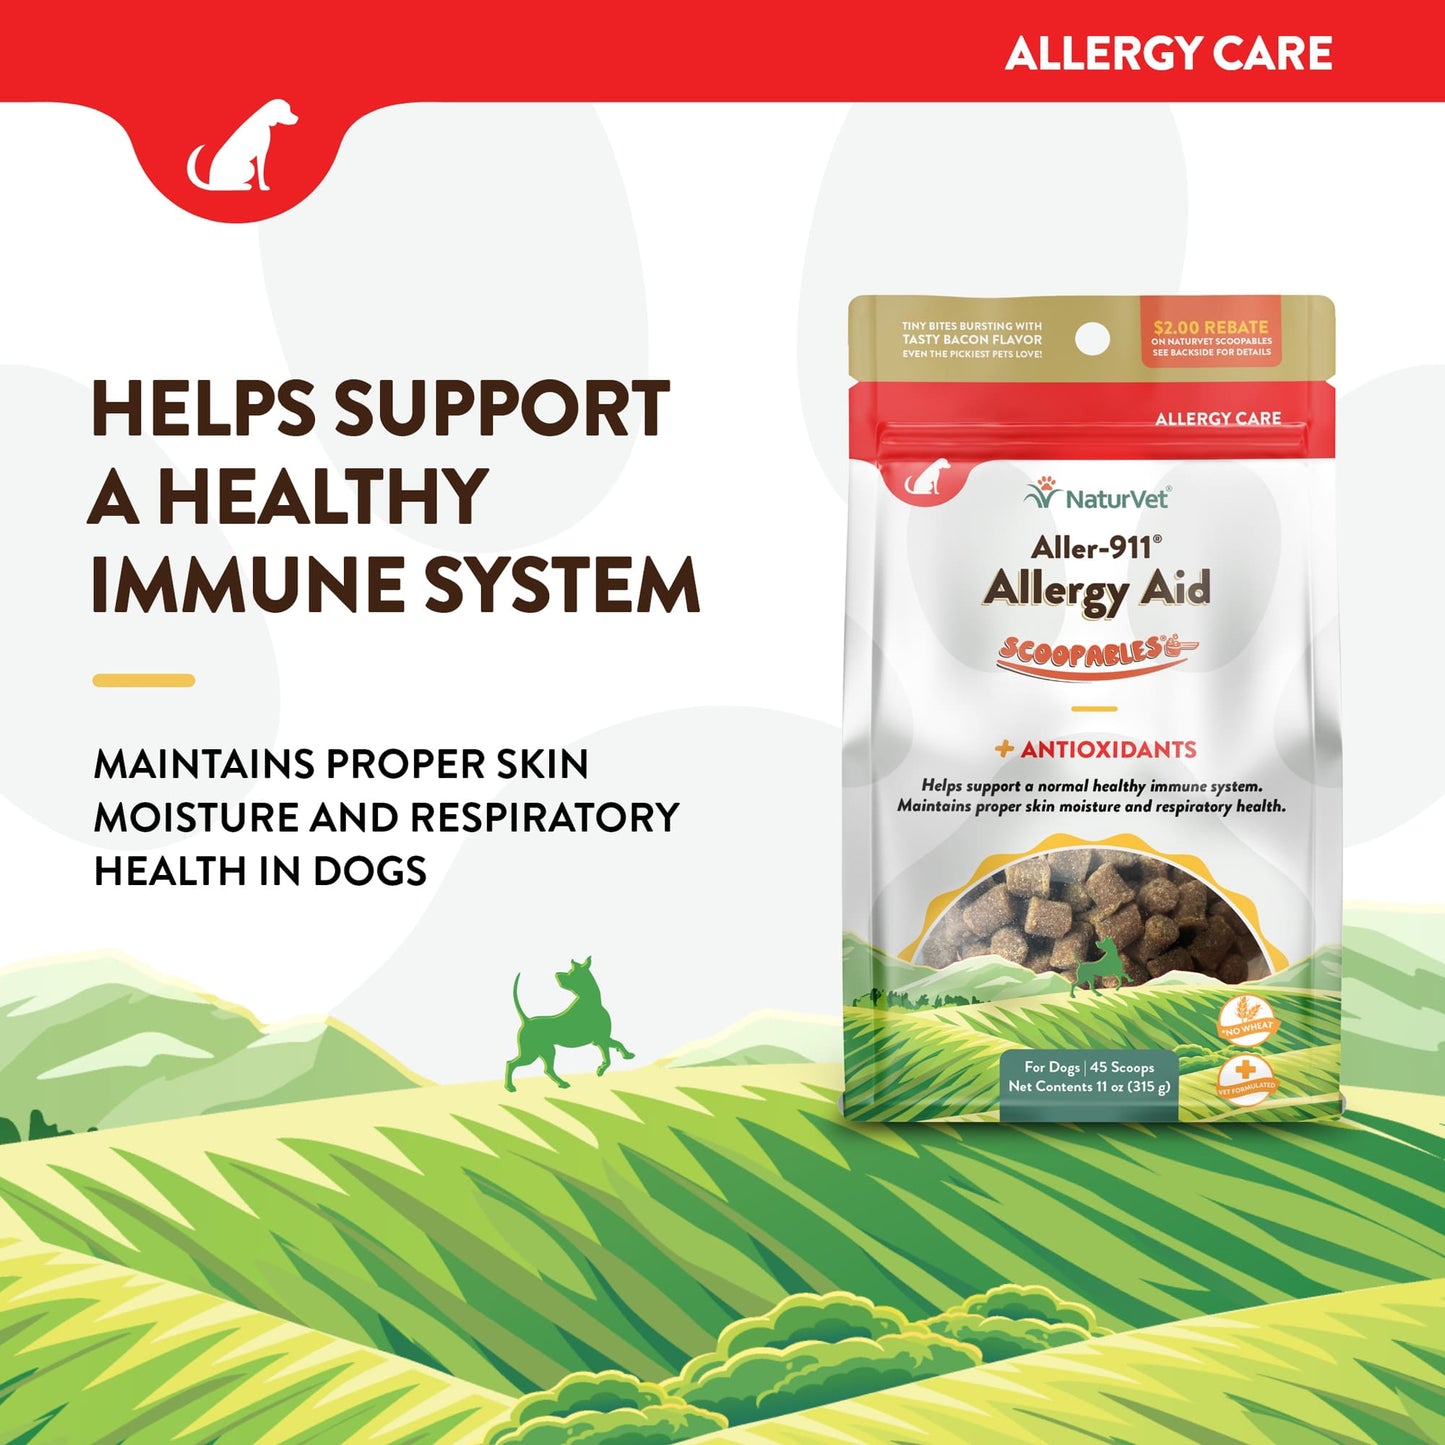 Scoopables Aller-911® Allergy Aid